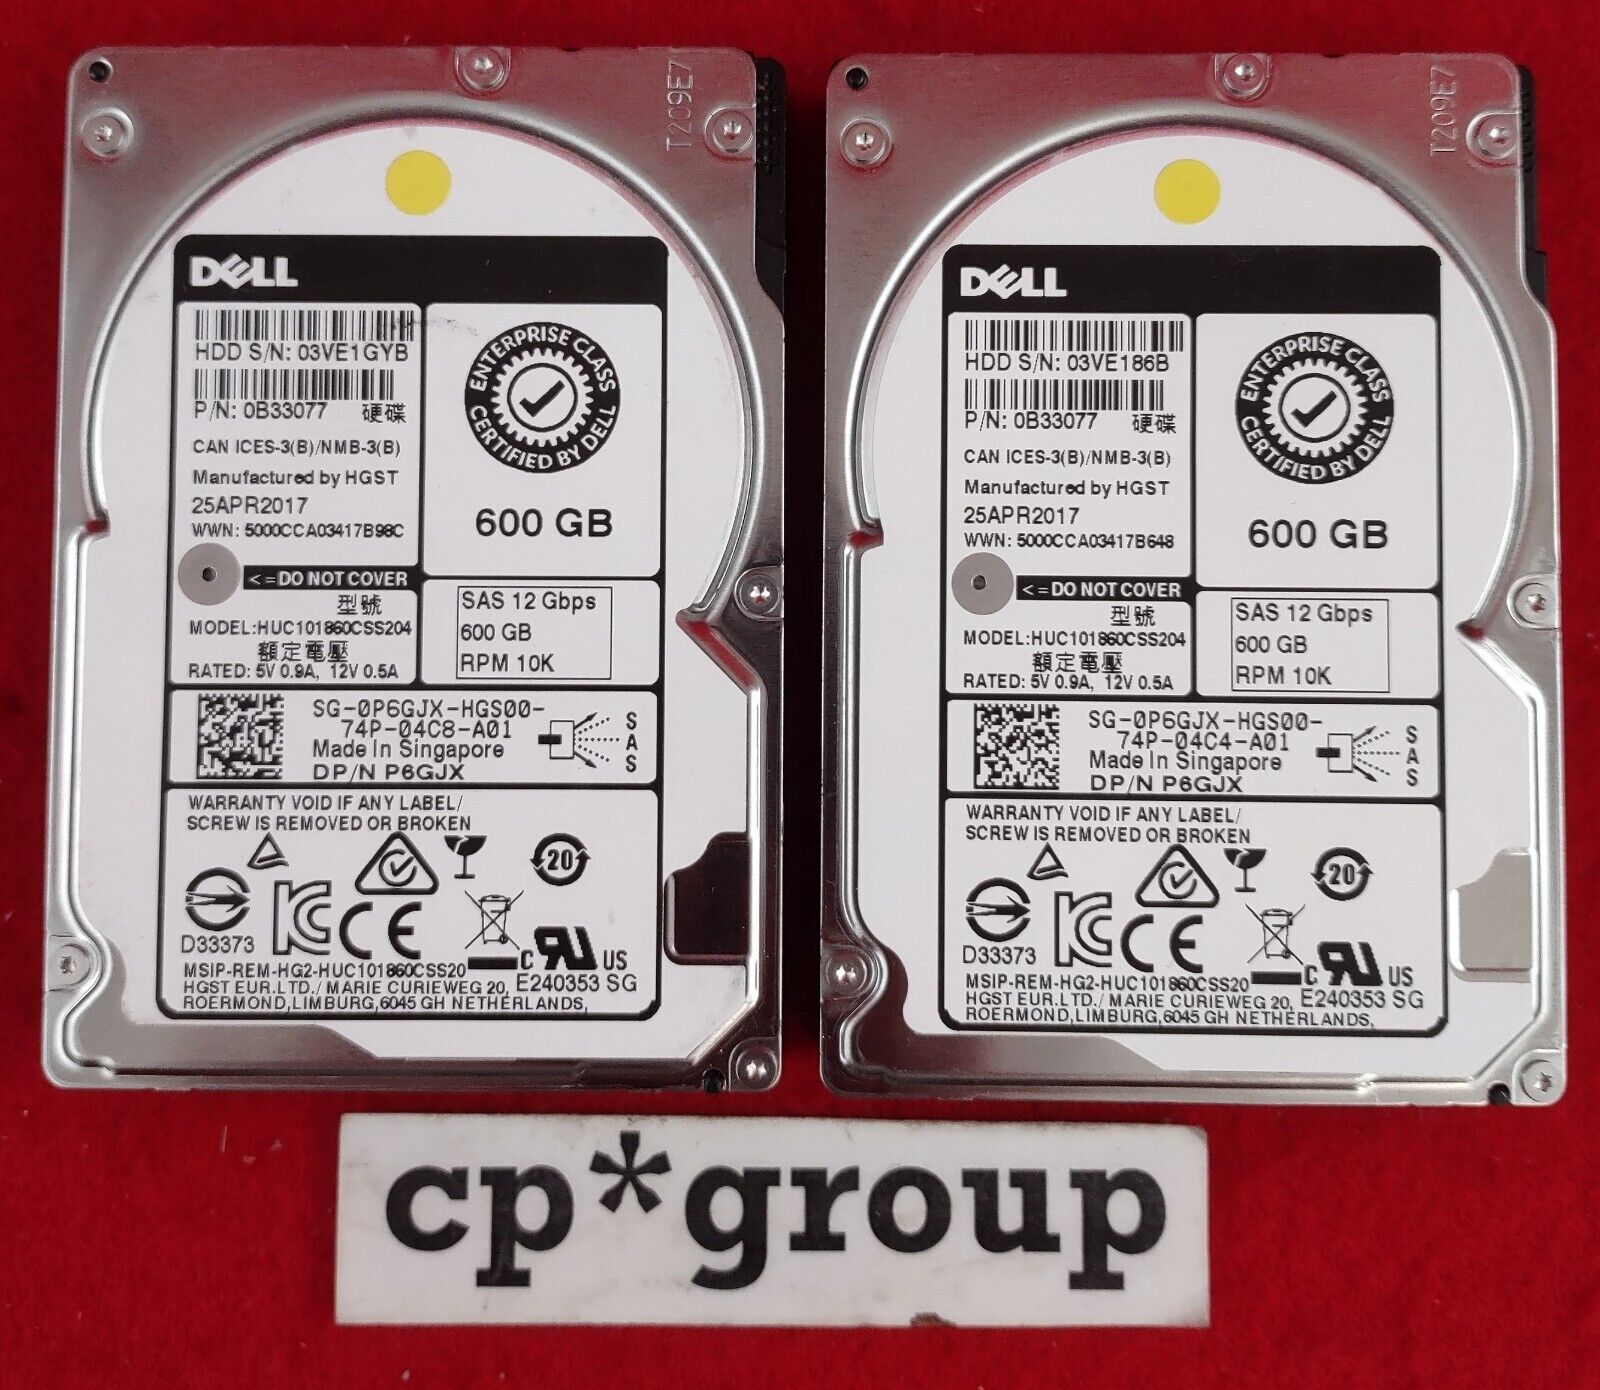 LOT OF 2 Dell 600GB 10K SAS 12Gbps 2.5